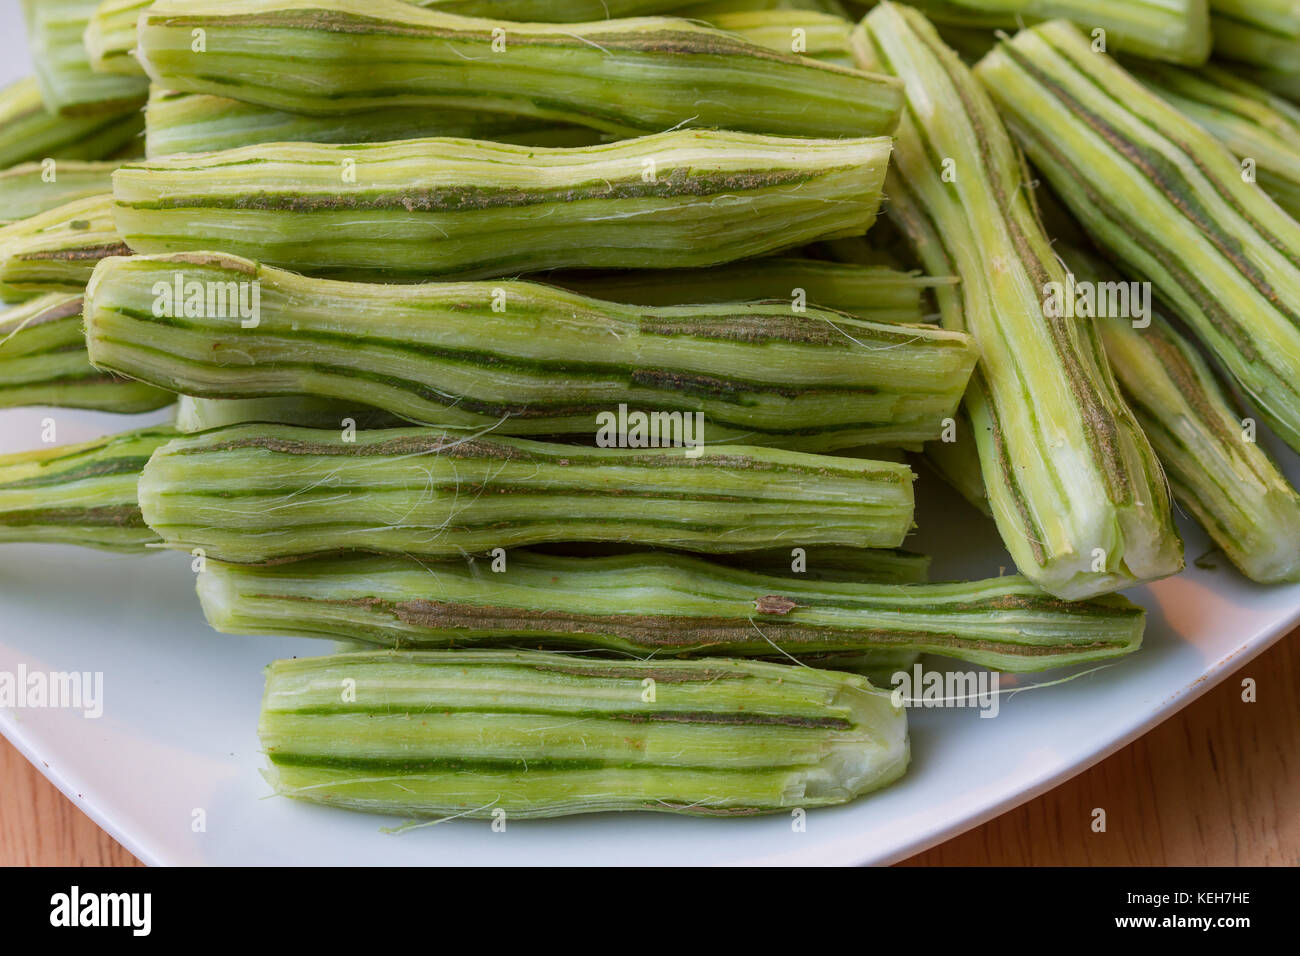 Horse radish tree, Drumstick or Moringa in the plate on wooden table Stock Photo